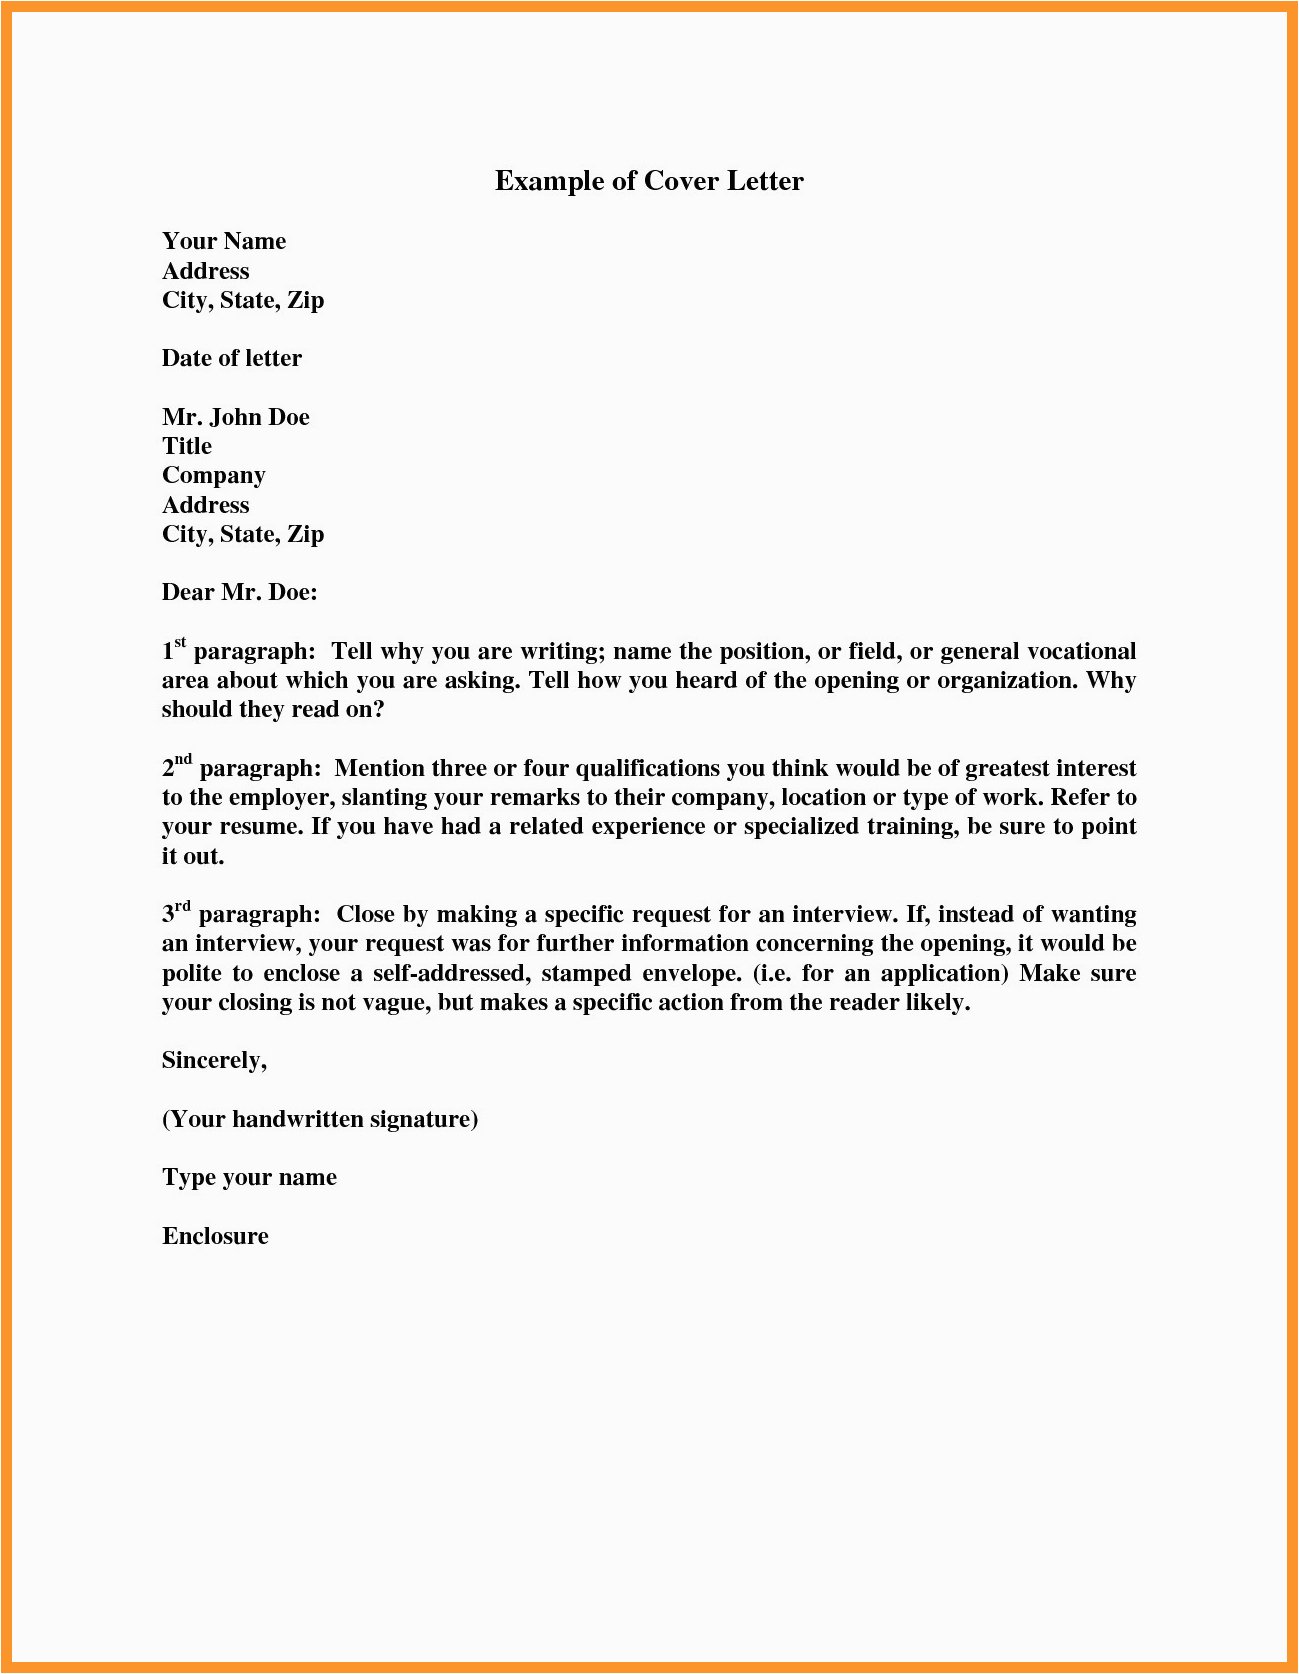 Sample Resume Cover Letter Unknown Recipient Sample Cover Letter for Unknown Pany